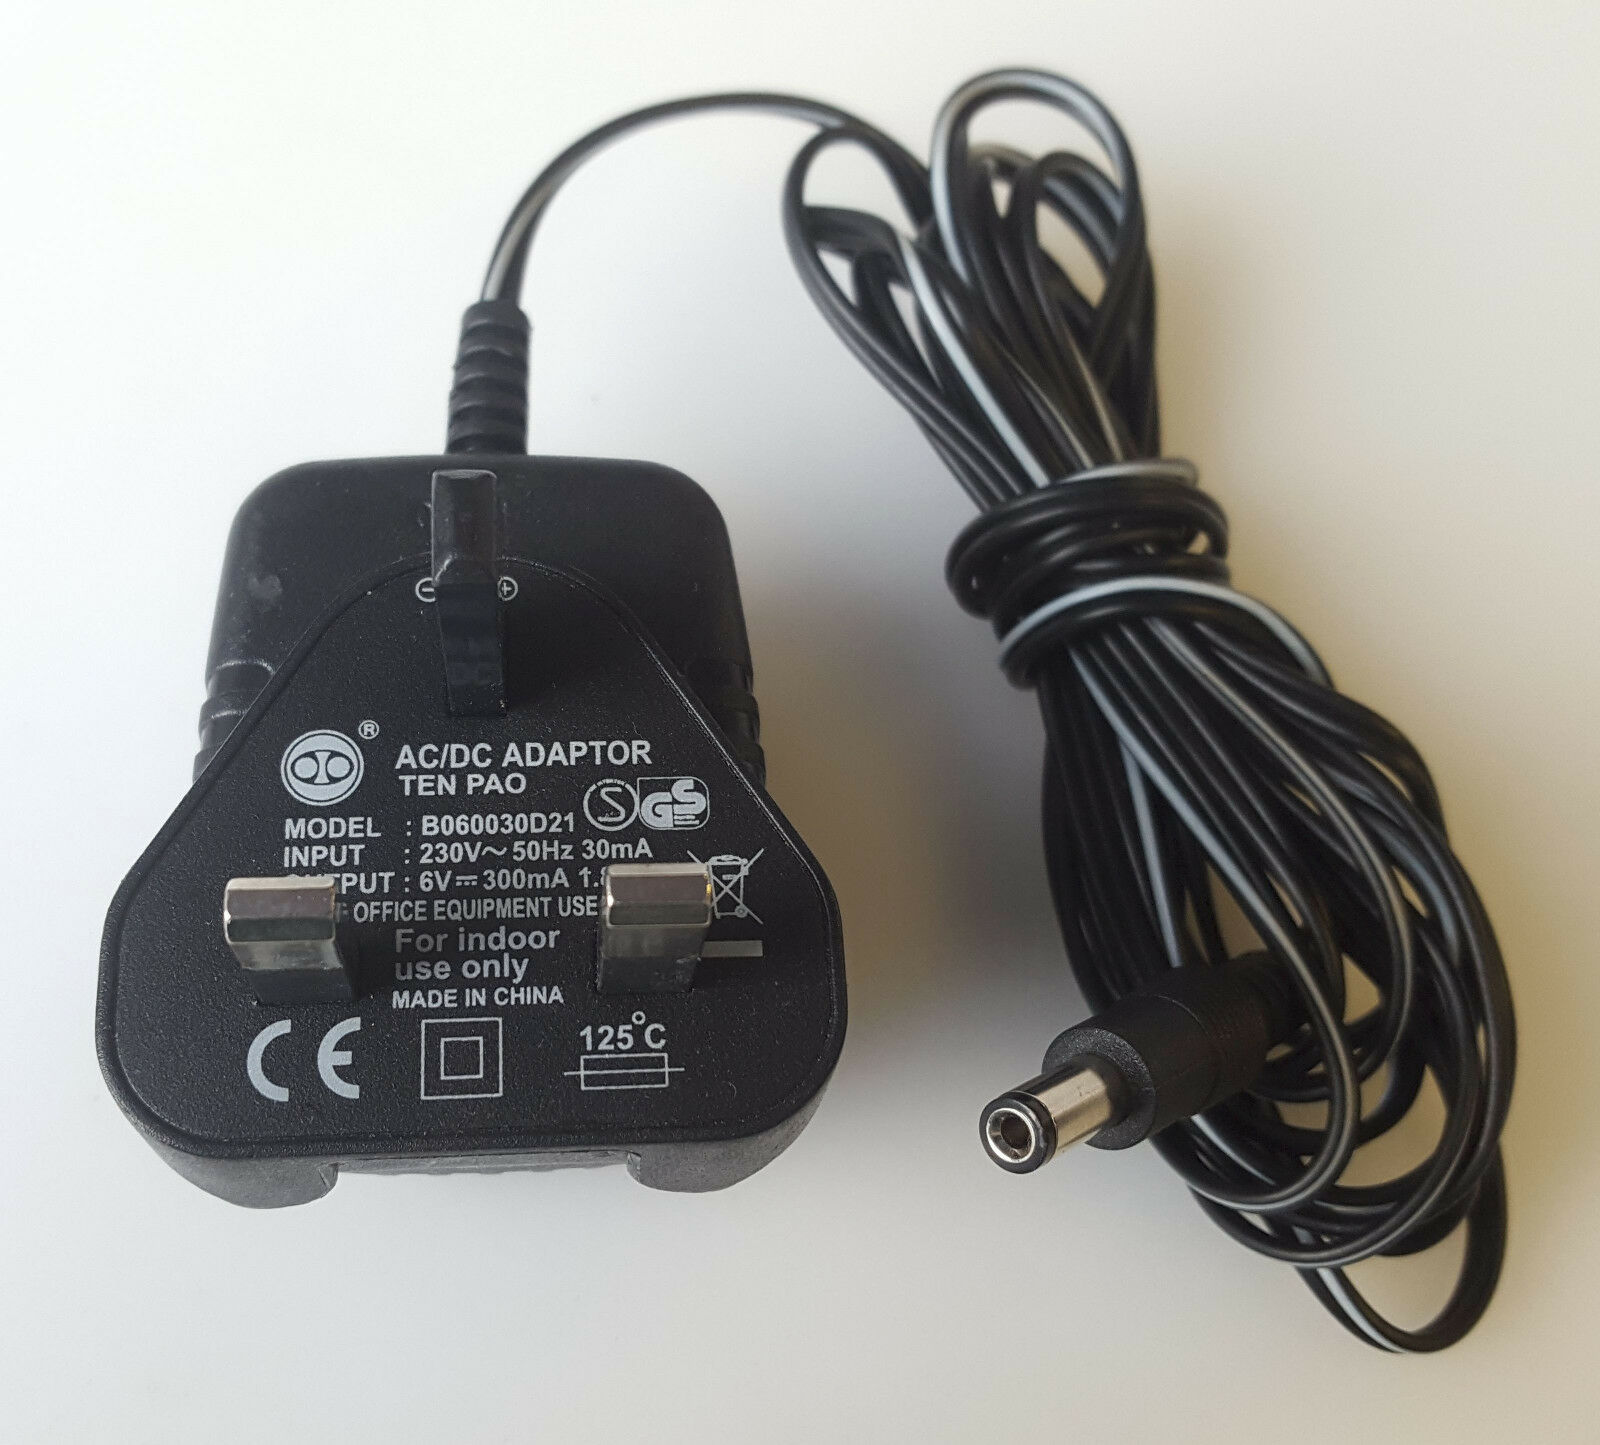 *Brand NEW*TEN PAO B060030D21 6V 0.3A AC/DC ADAPTER POWER SUPPLY - Click Image to Close